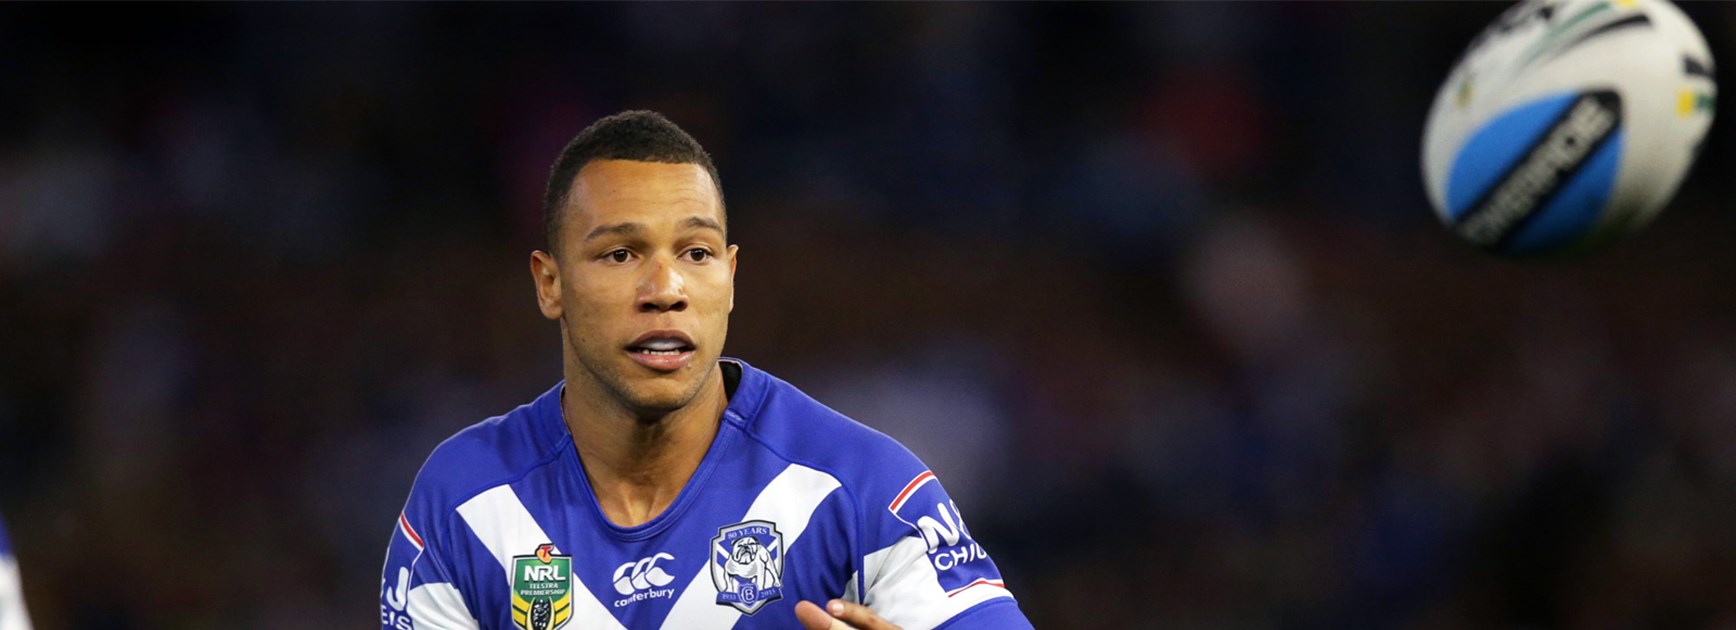 Moses Mbye has been one of the success stories of the Bulldogs' 2015 season.